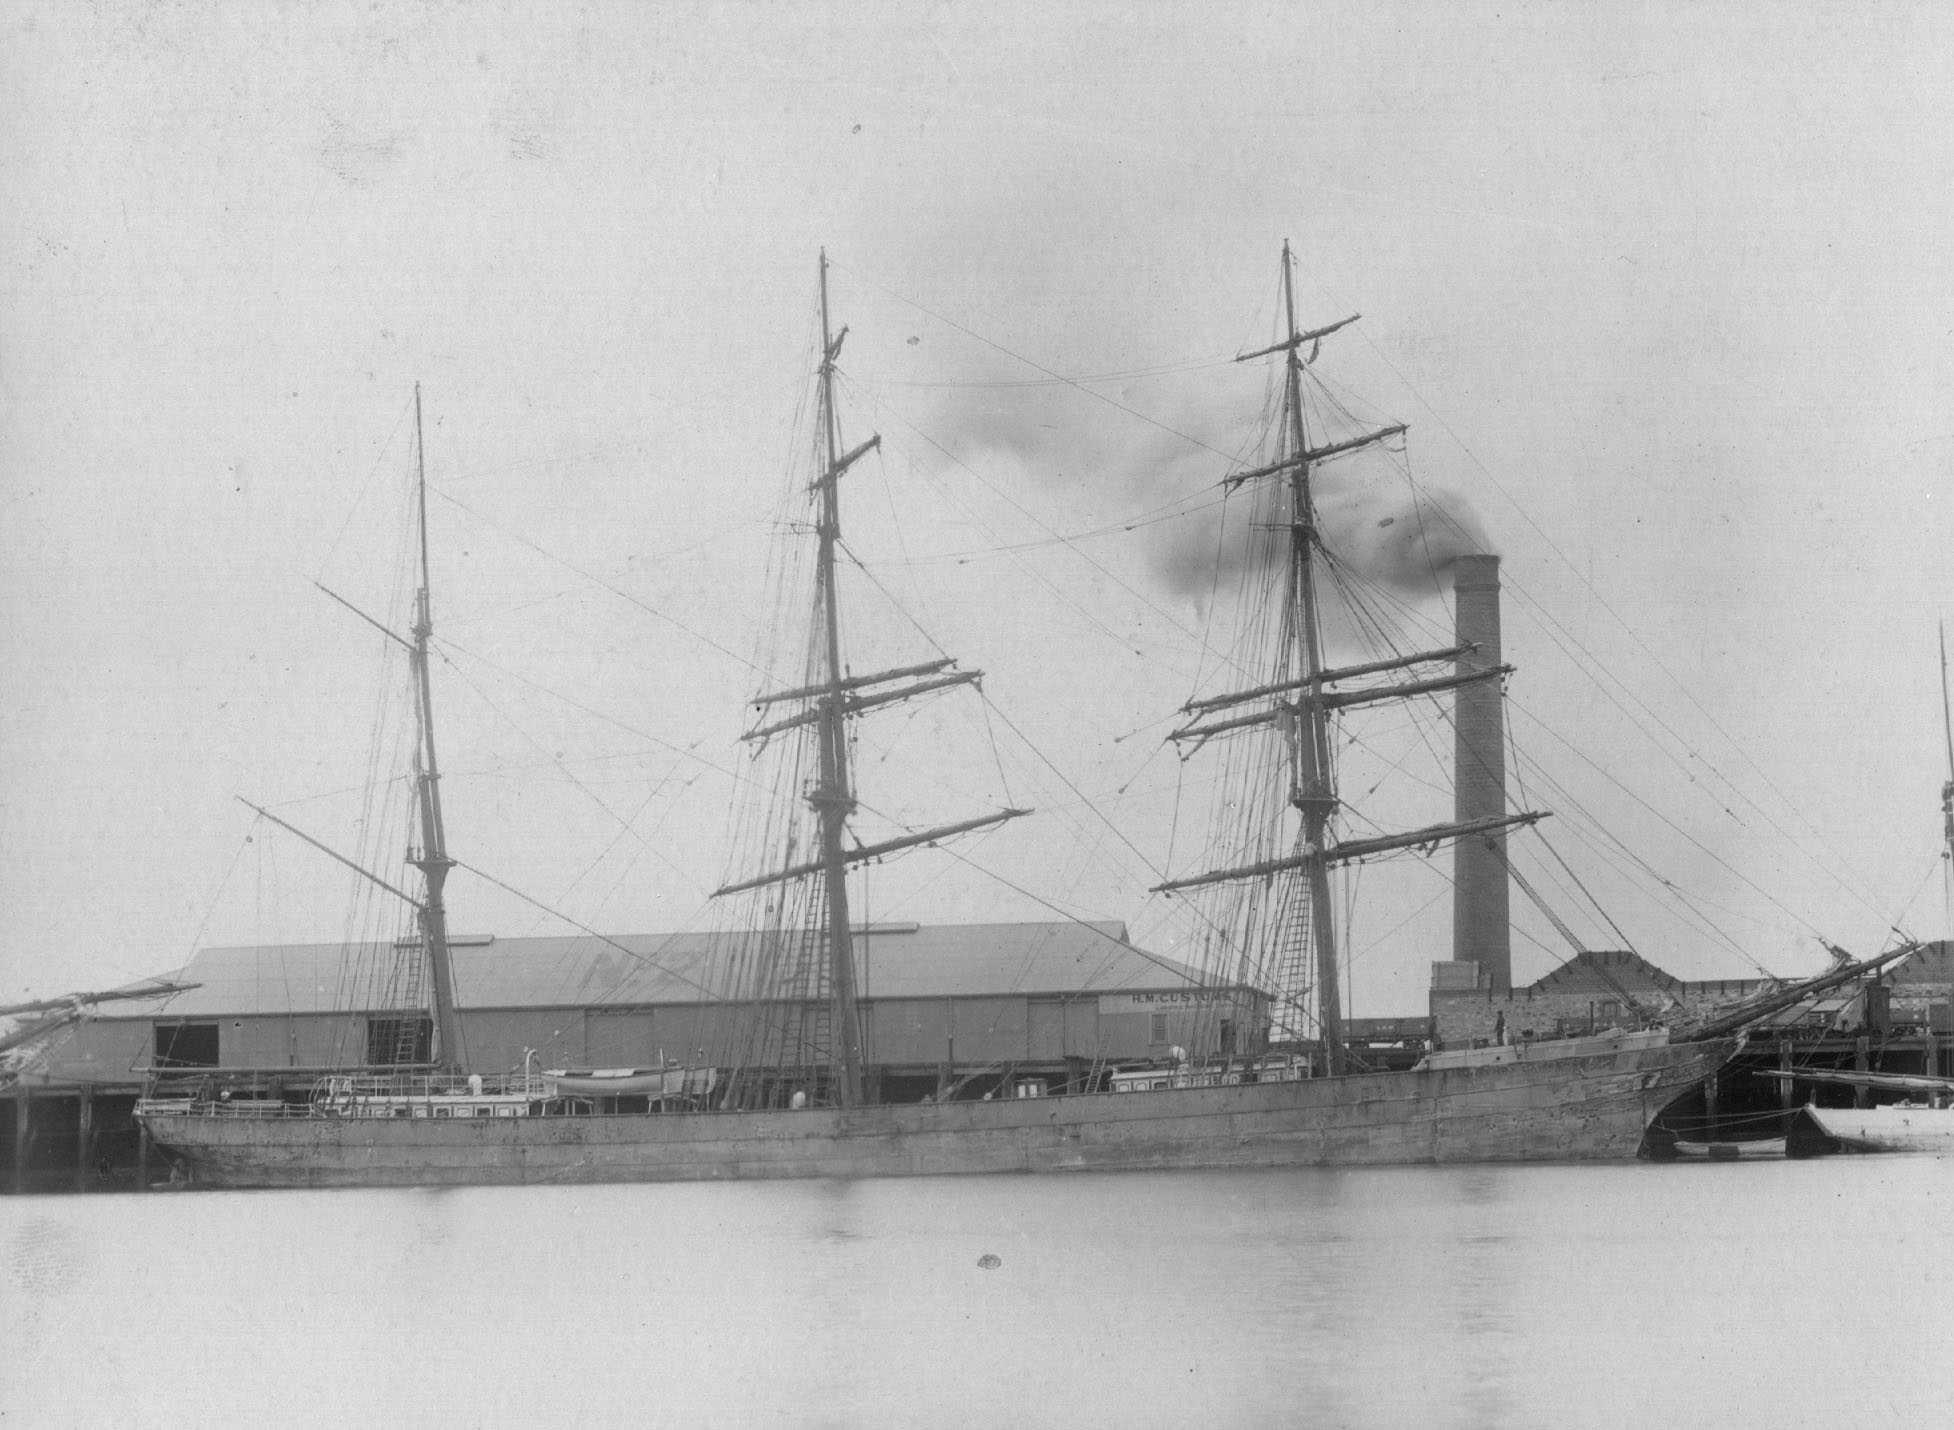 Barque "Sir Henry lawrence", built in 1865.